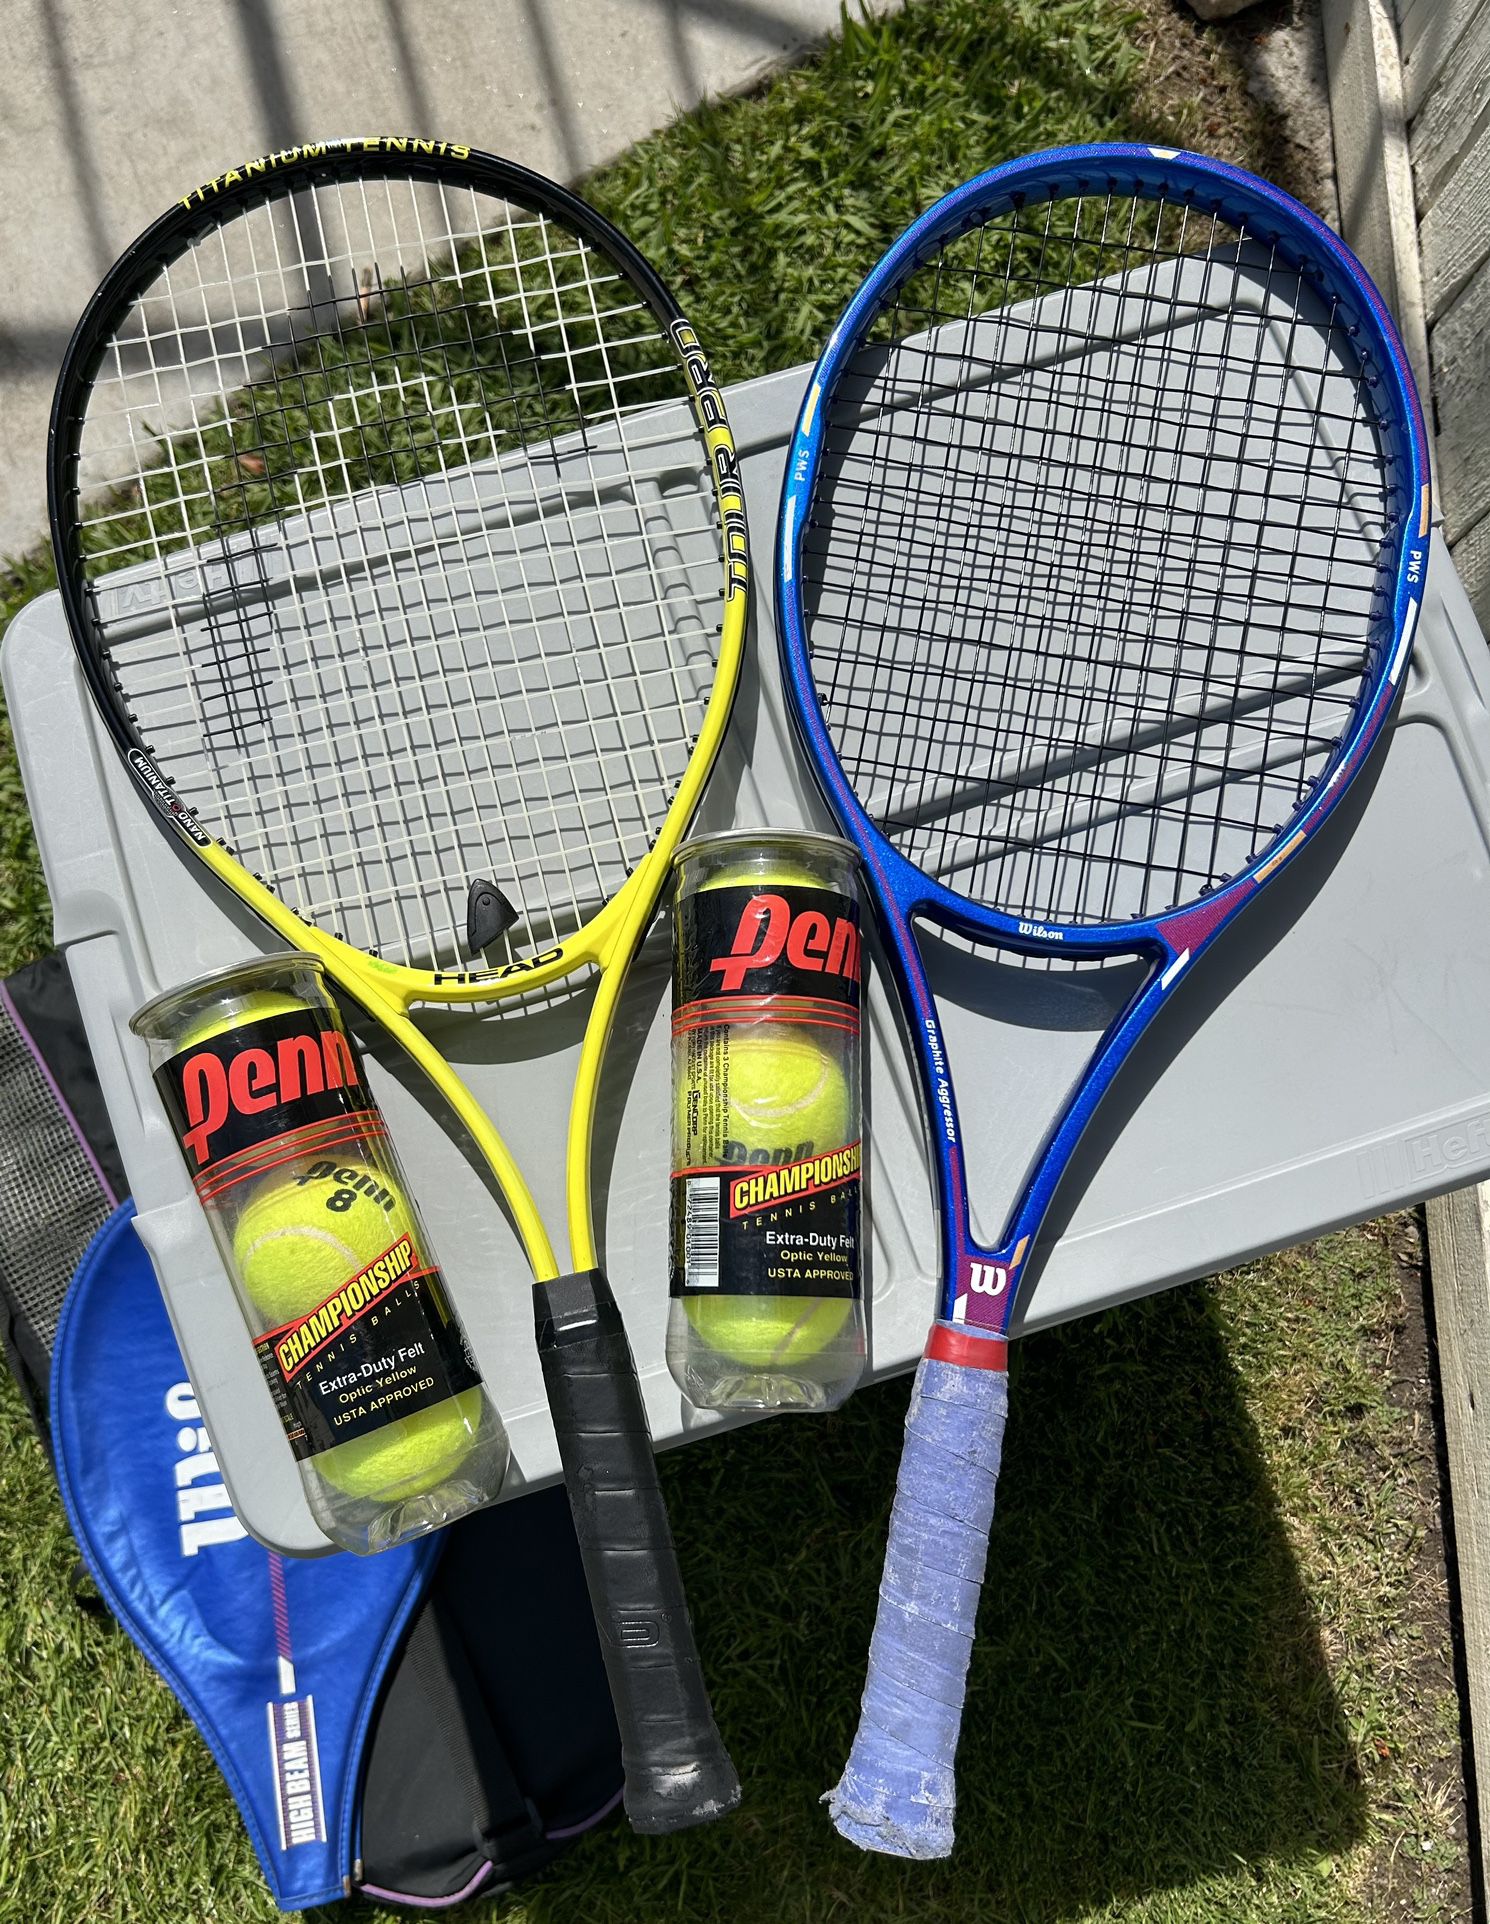 Two Tennis Rackets And Tennis Balls